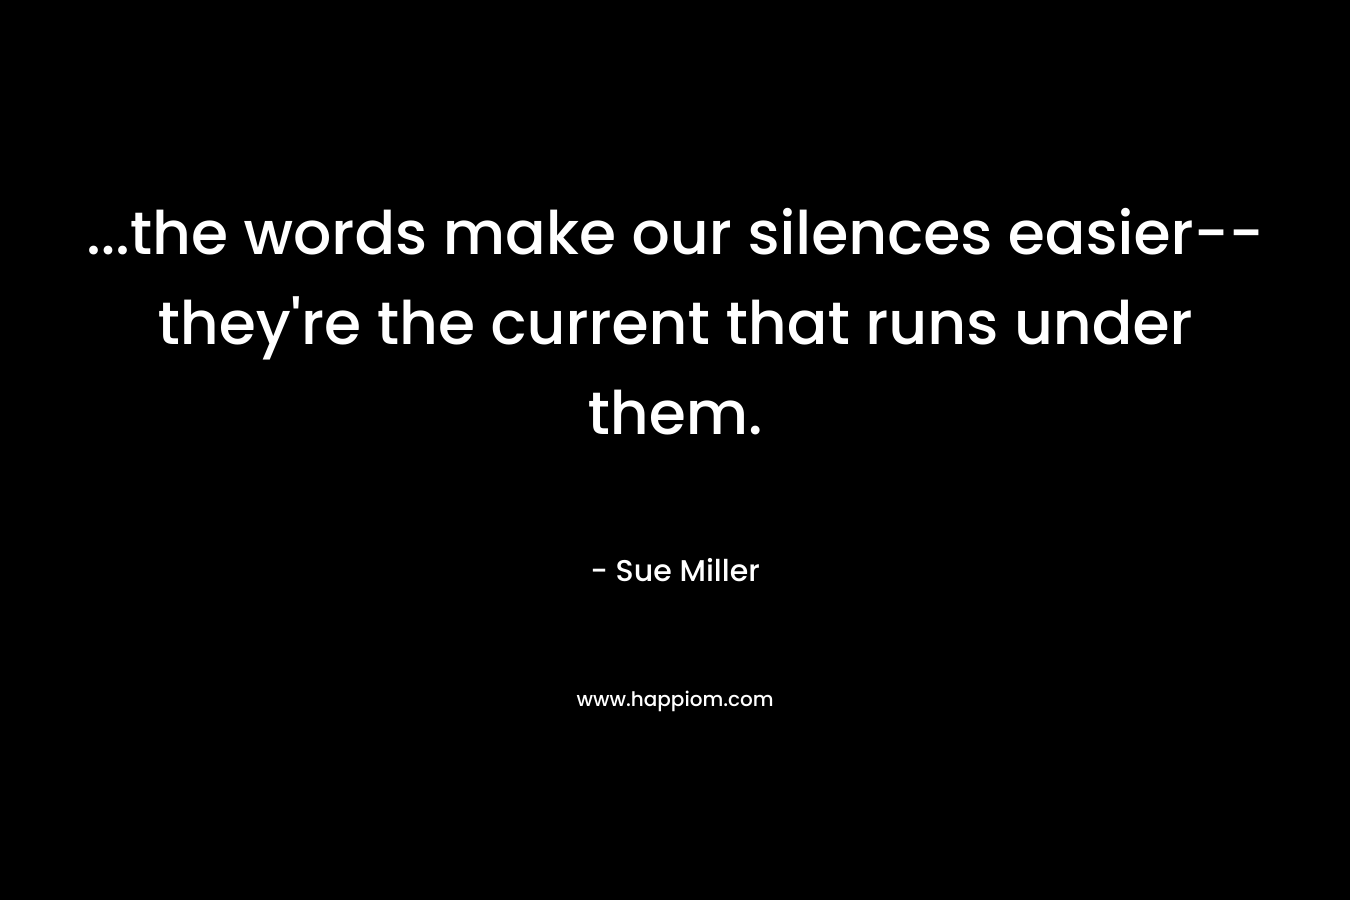 ...the words make our silences easier--they're the current that runs under them.